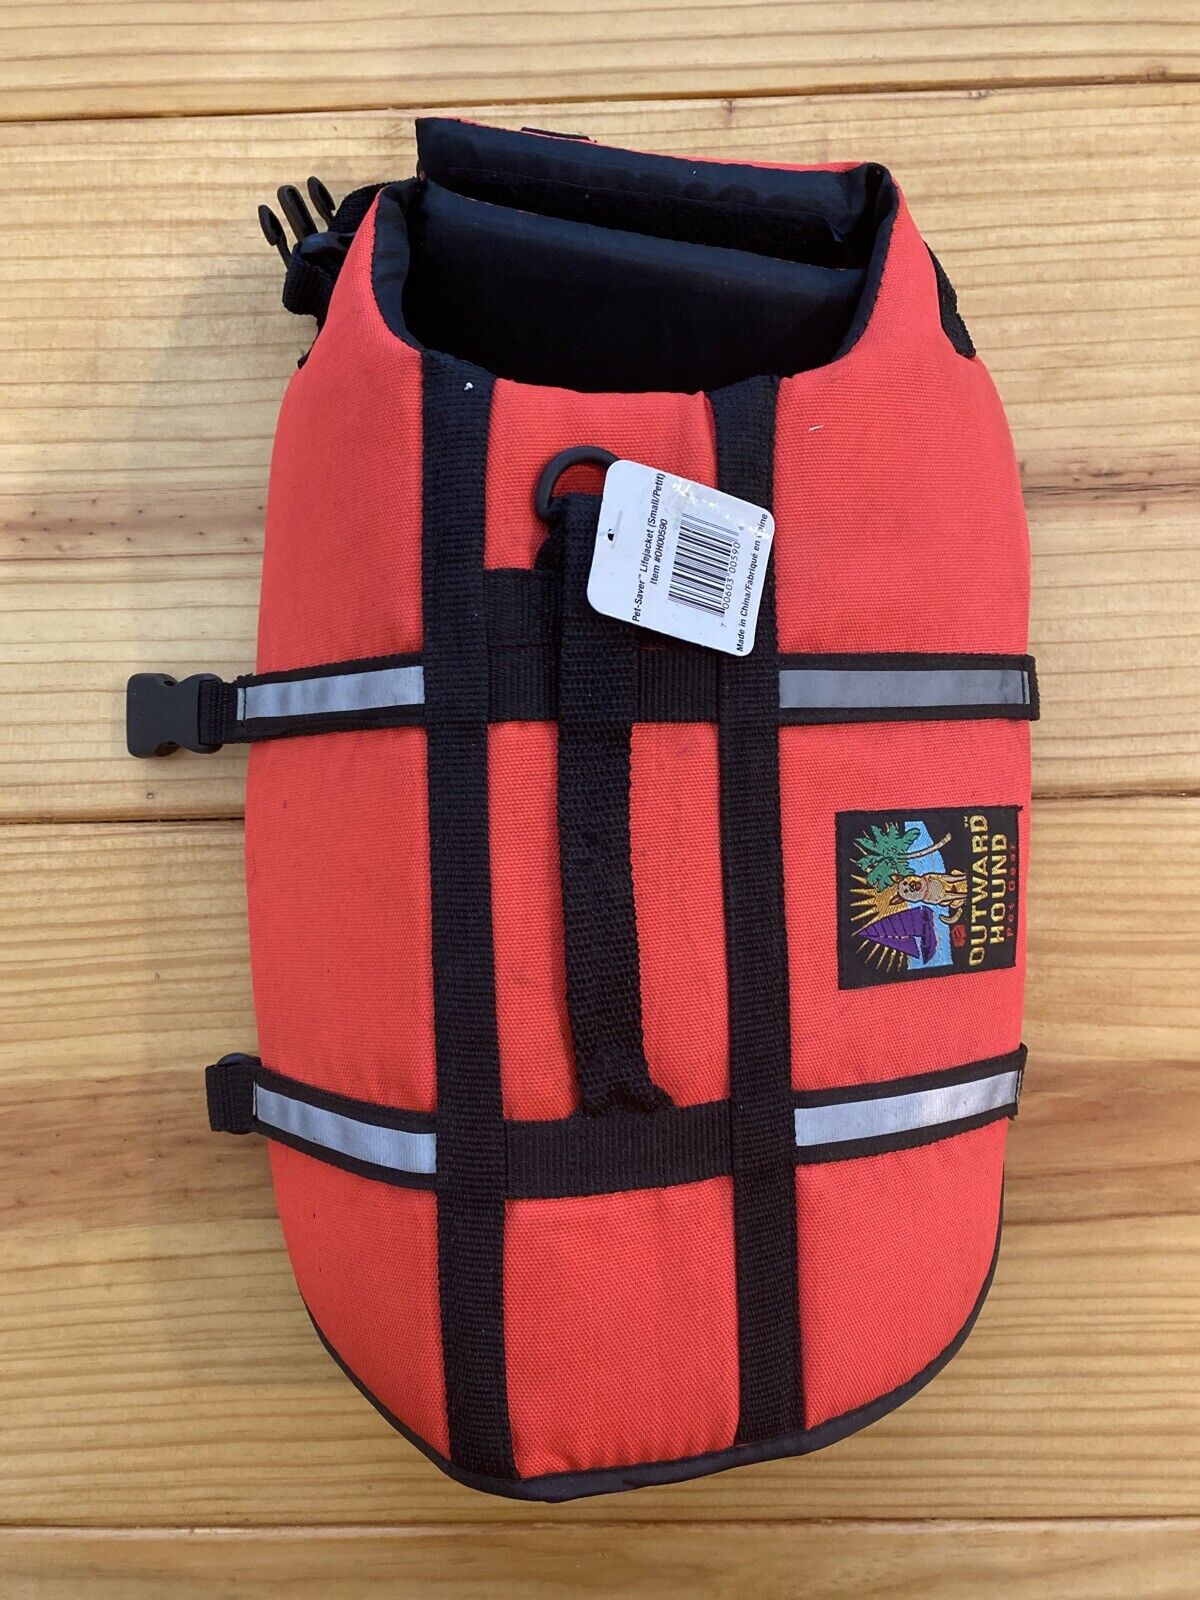 Outward Hound Pet Saver Life Jacket Water Float Safety Vest size Small